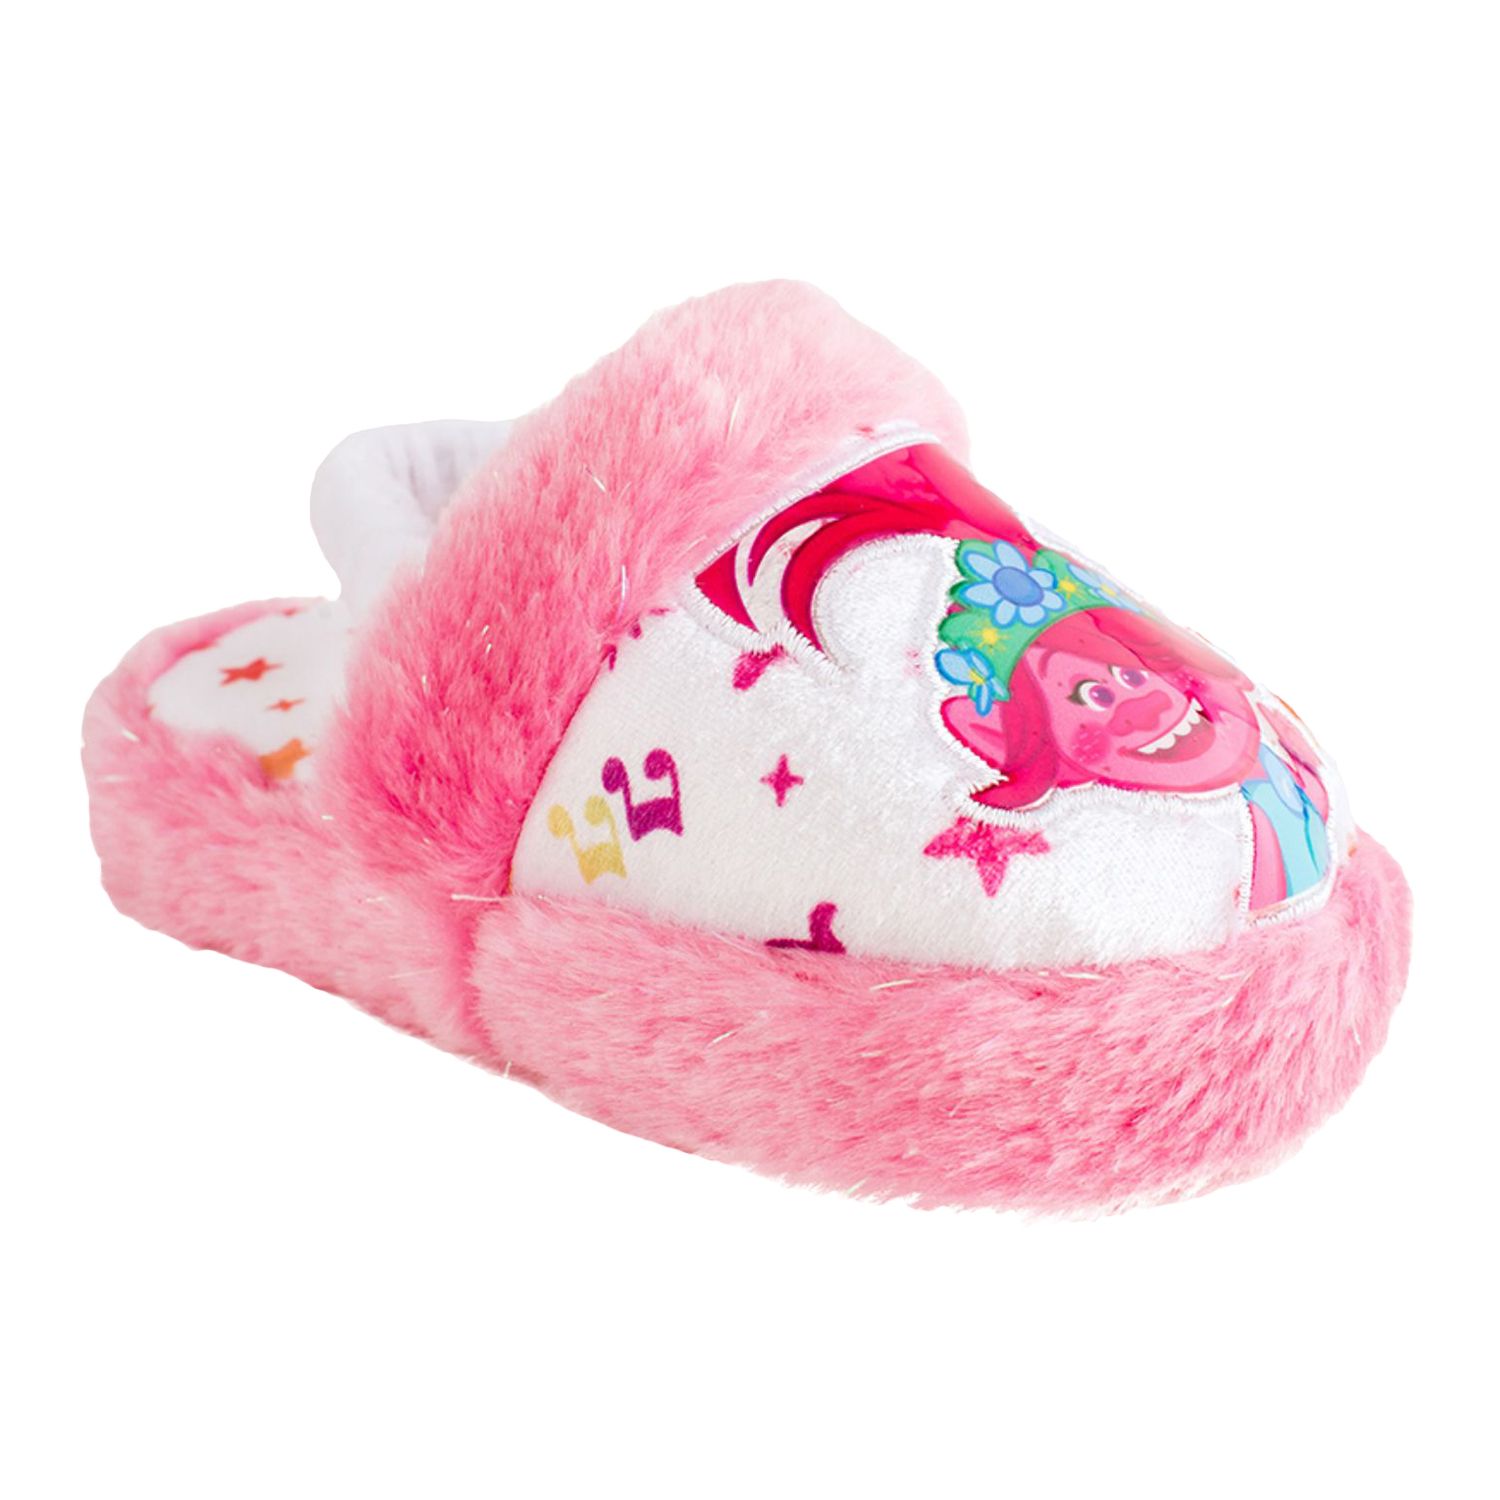 childrens slippers size 6